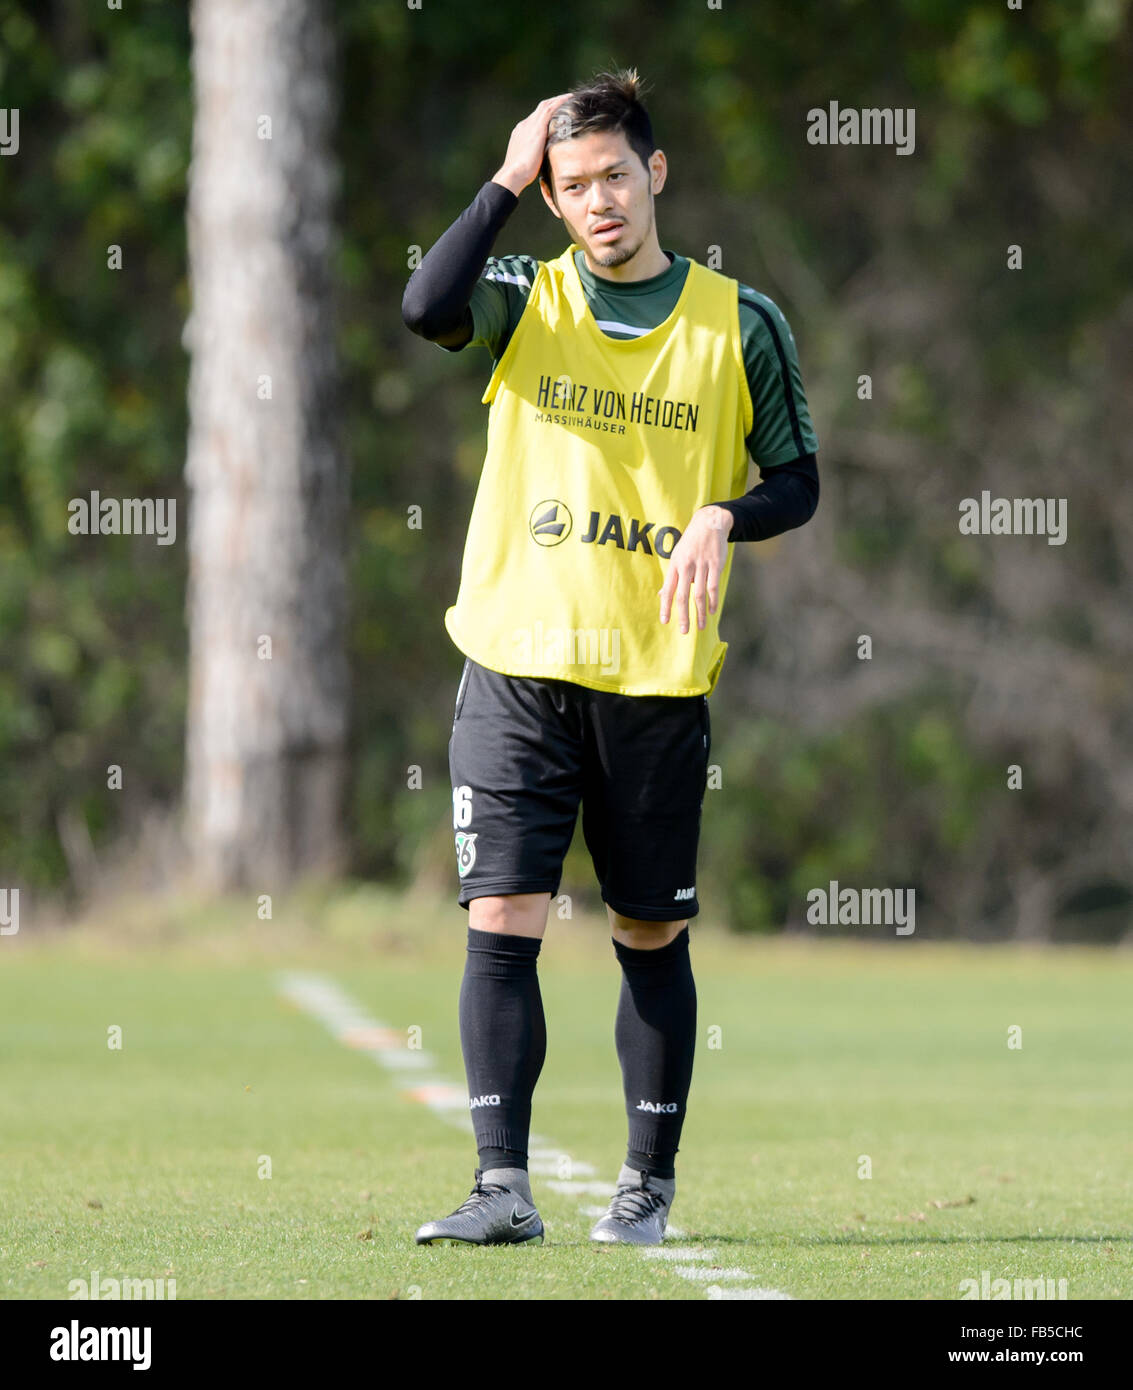 Hannover's new signing Hotaru Yamaguchi attends a training session of German Bundesliga soccer club Hannover 96 in Belek, Turkey, 10 January 2016. Hannover 96 is in Belek to prepare for the second half of the German Bundesliga season. Photo: THOMAS EISENHUTH/dpa Stock Photo